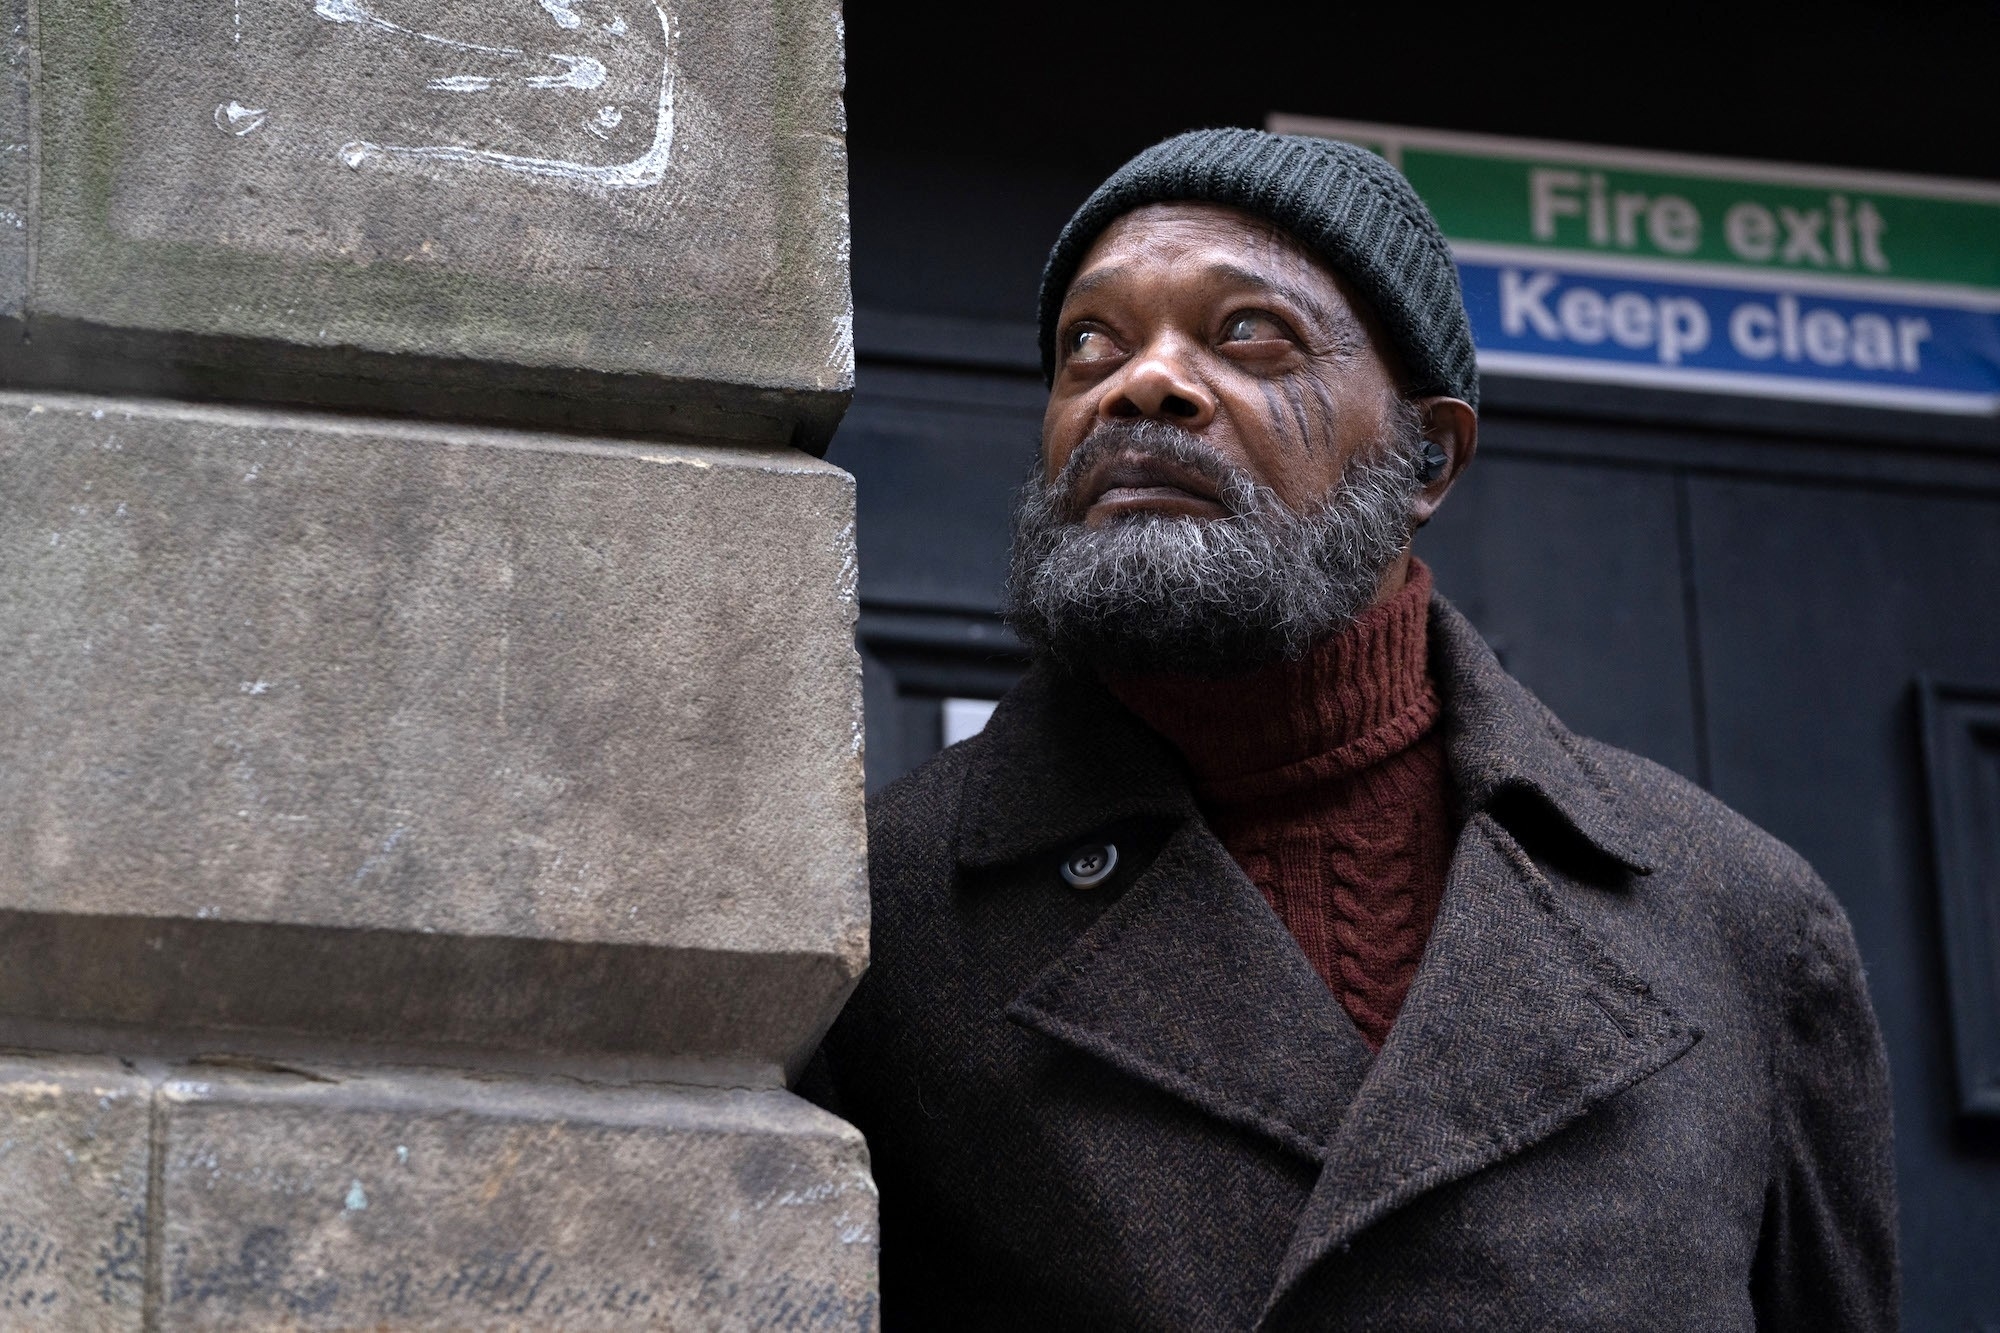 Nick Fury with a beard and a knit cap, wearing a layered outfit, looking upwards beside a building with a sign